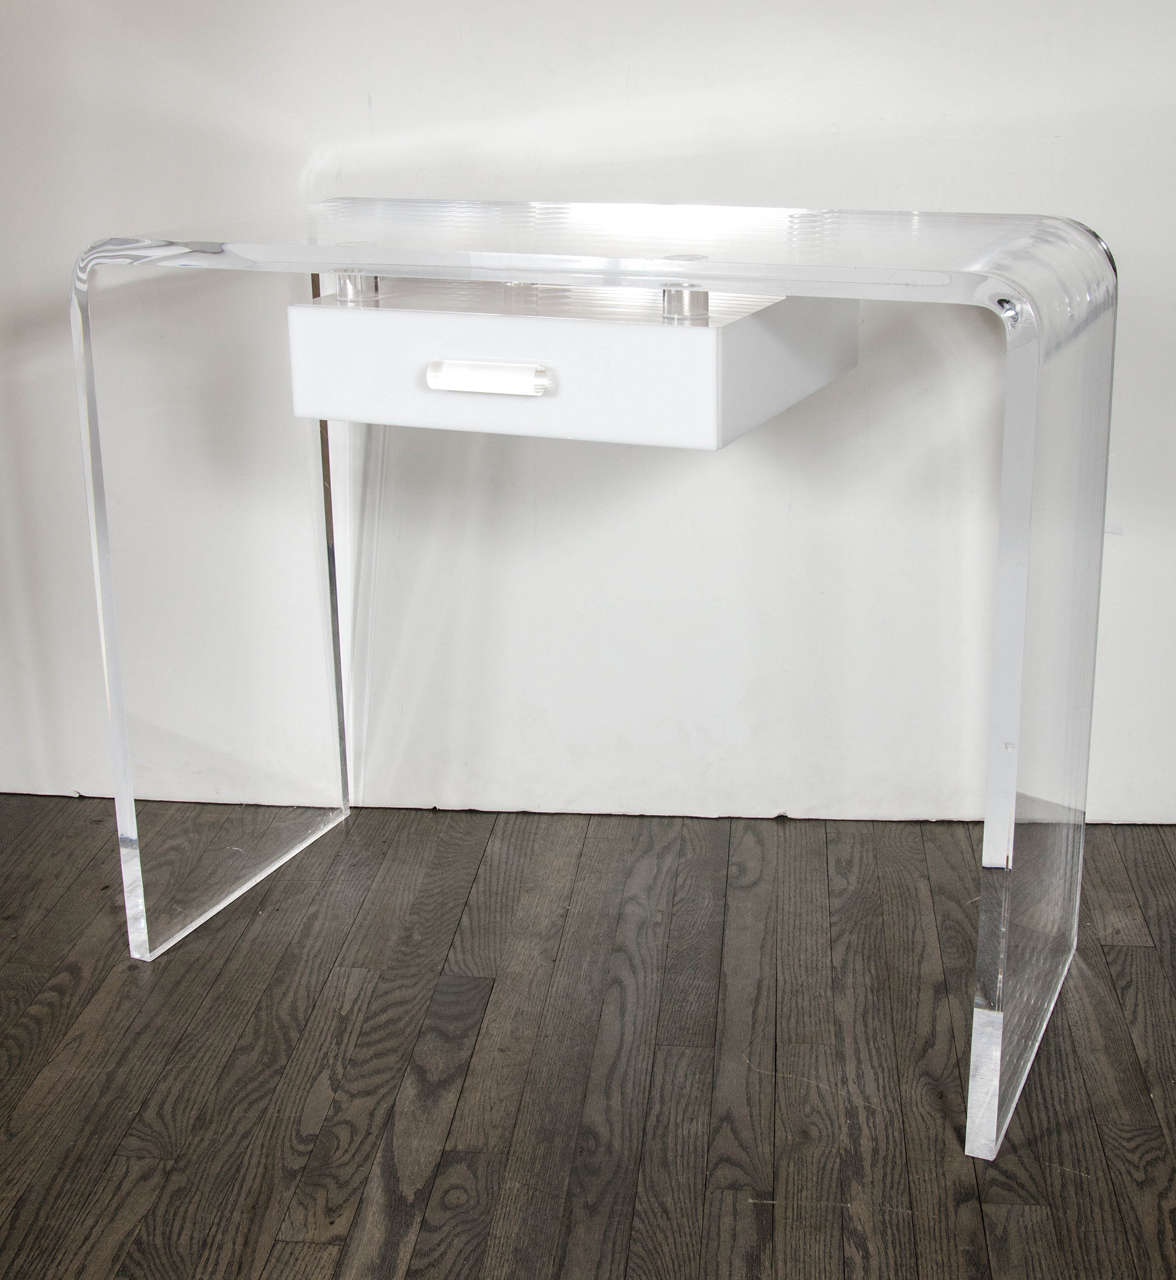 This vanity/desk features a waterfall design in clear lucite with a pull out drawer in white lucite with a clear lucite knob.The drawer appears to have a floating effect making this a special modernist piece.Would be great as a vanity or desk.